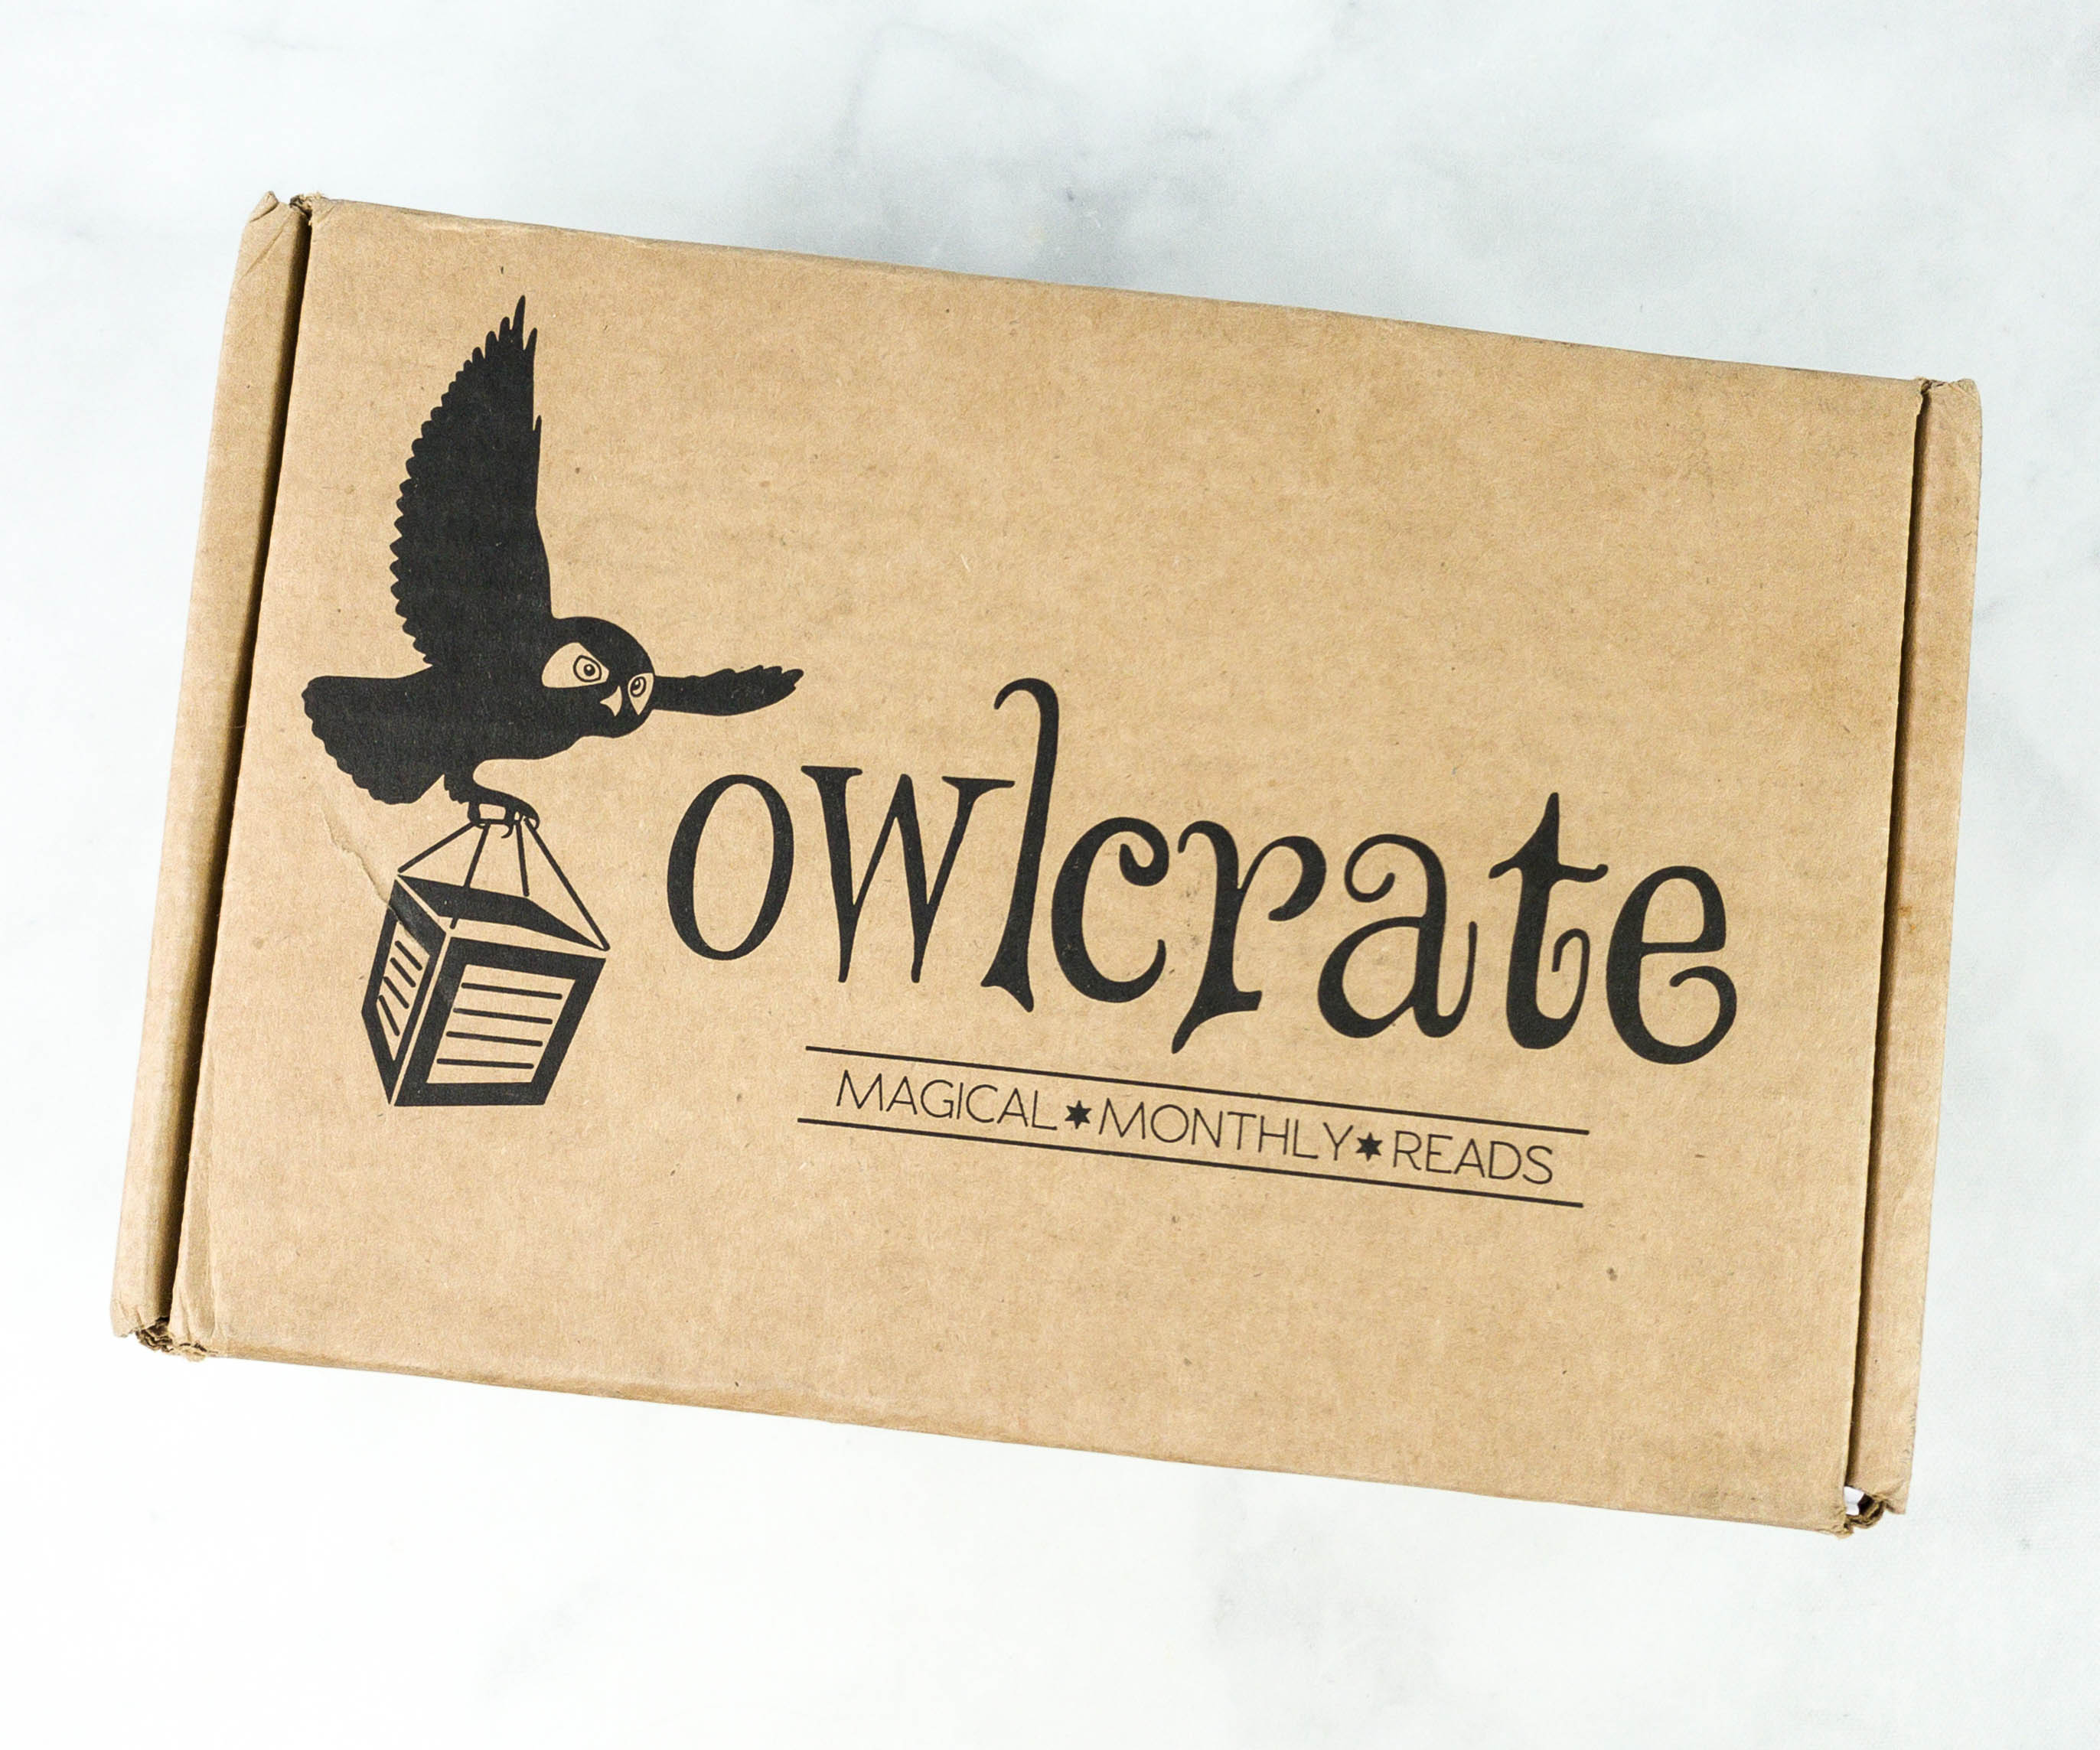 https://hellosubscription.com/wp-content/uploads/2021/01/owlcrate-december-2020-1.jpg?quality=90&strip=all